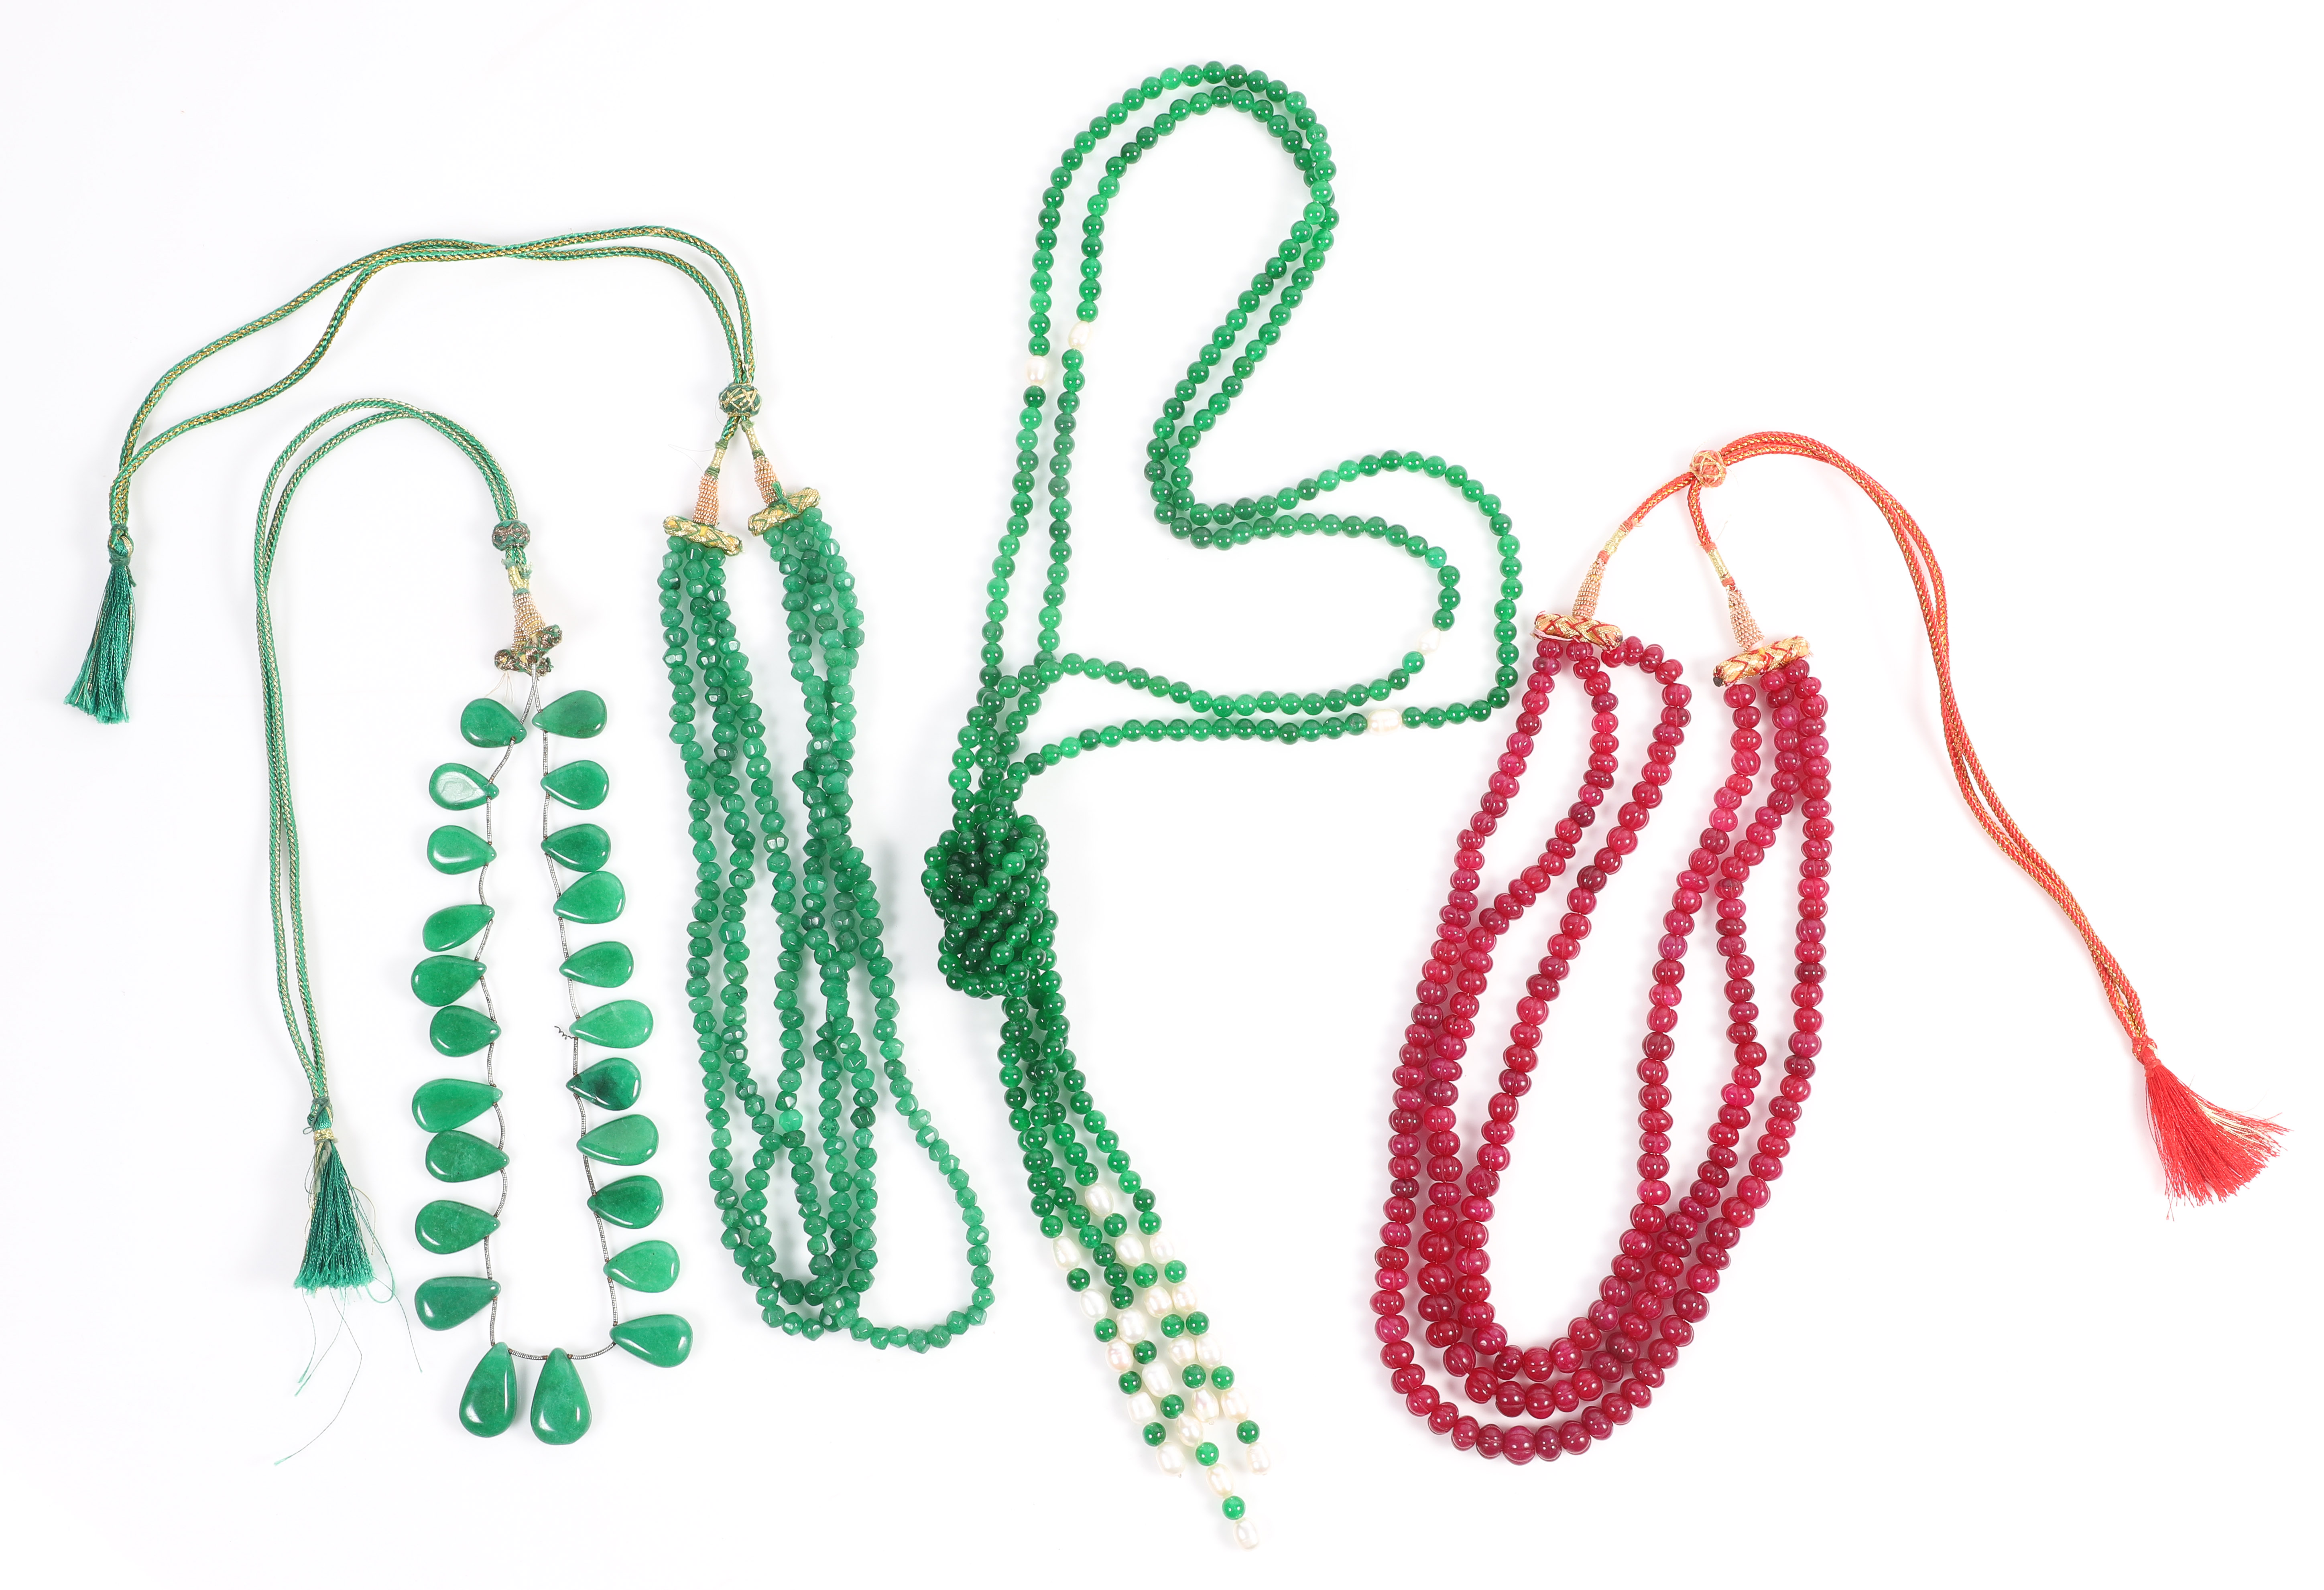 (4) Ruby, green stone and pearl